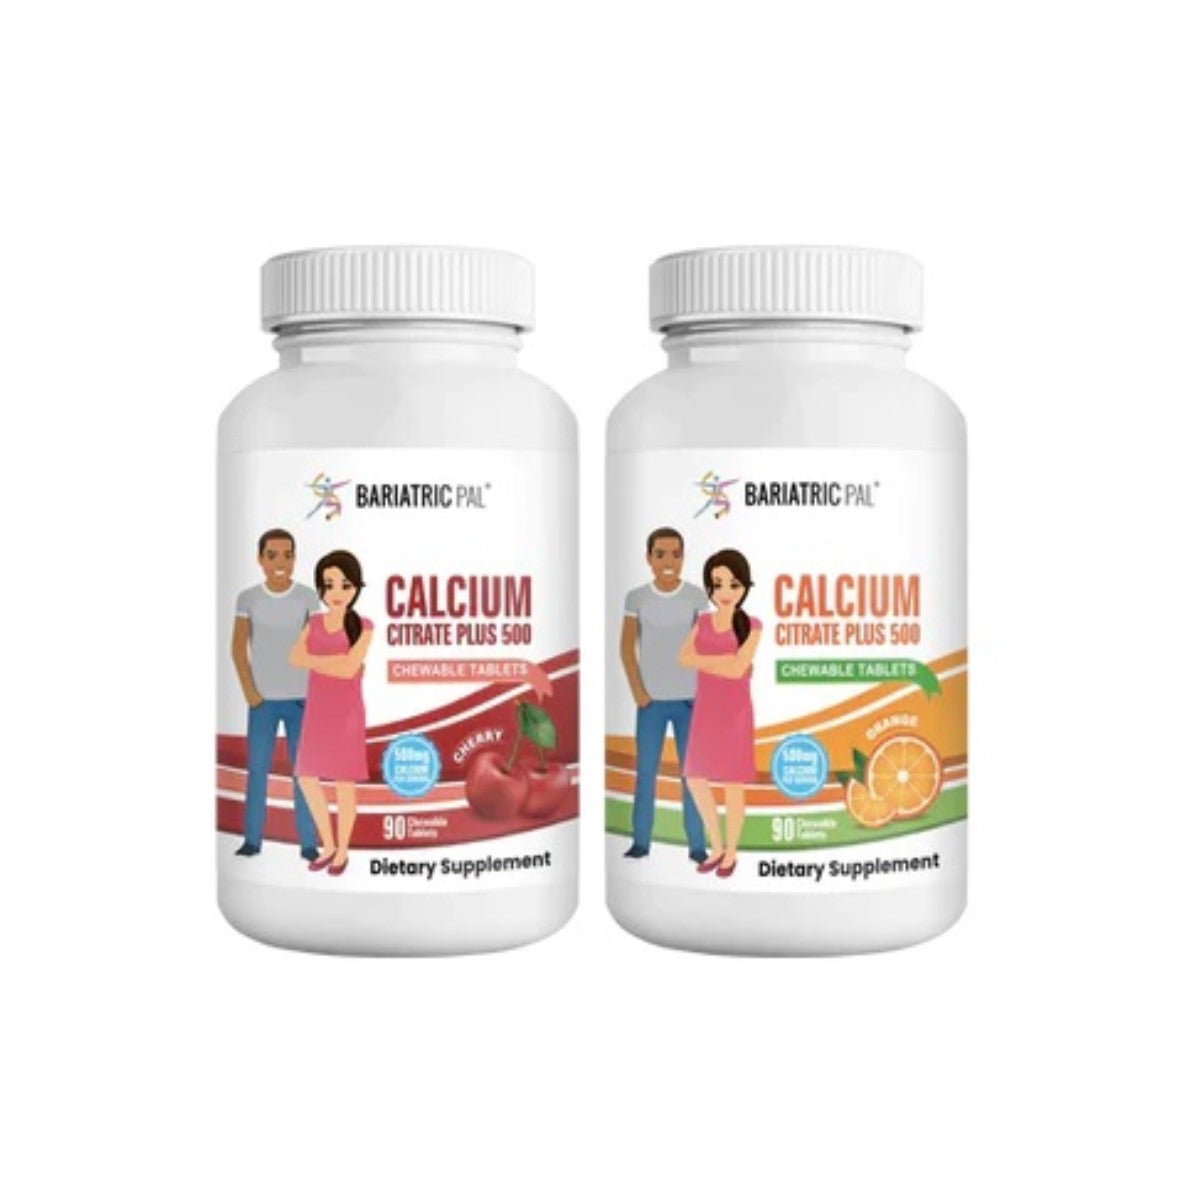 New Product: BariatricPal Calcium Citrate 500 mg Chewable Tablets